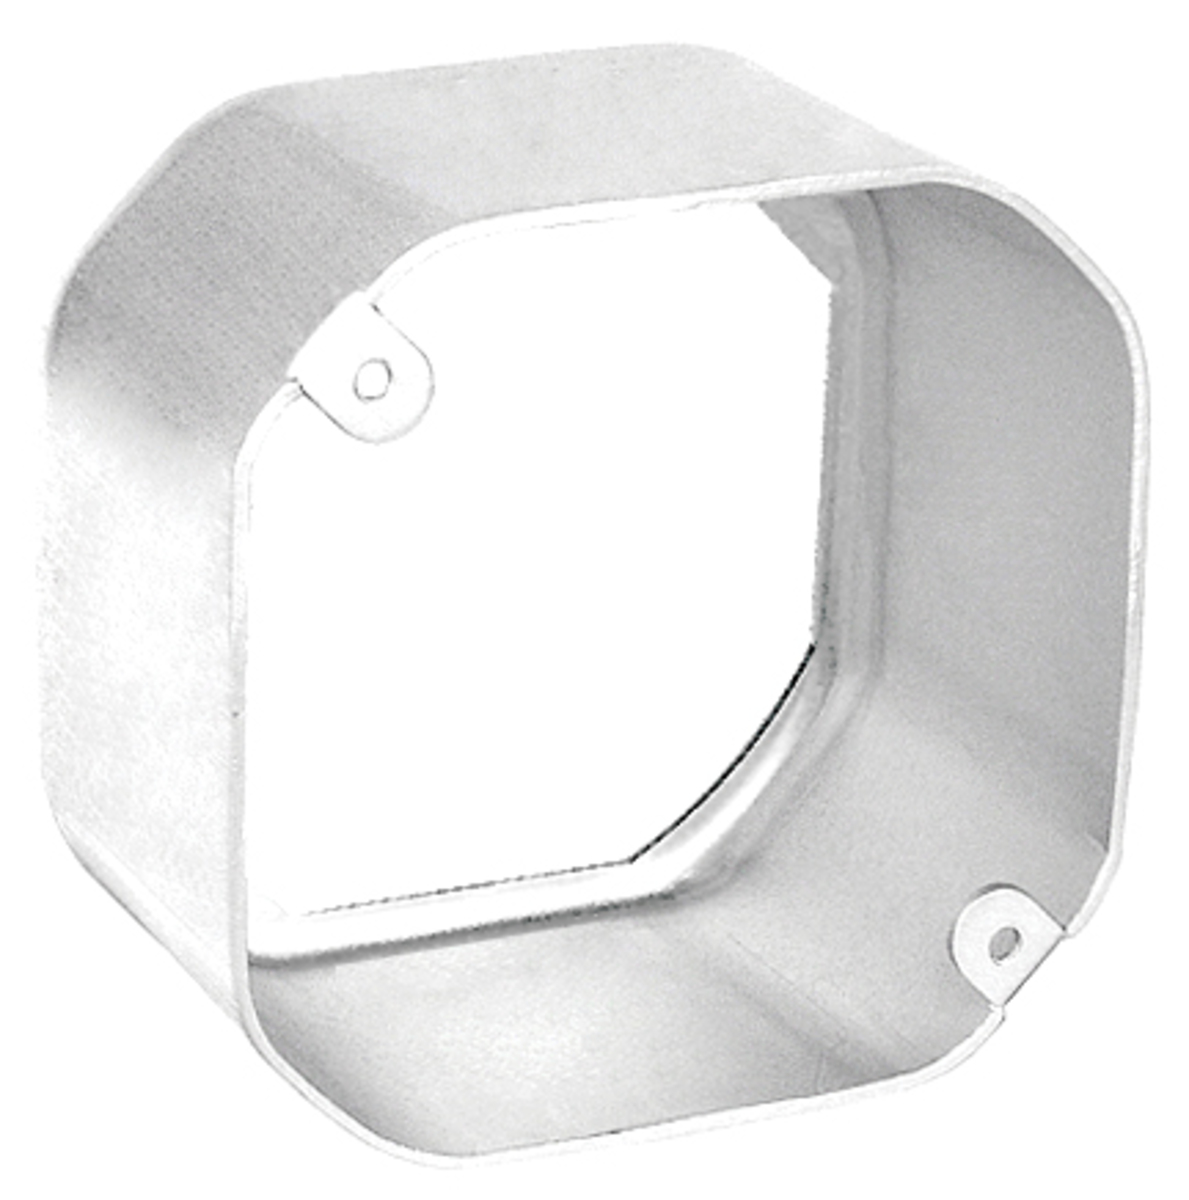 4" Octagon Extension Ring, 2-1/8" Deep - Drawn, No Knockouts And Fixture Ears 3-1/2" O.C. - Stainless Steel